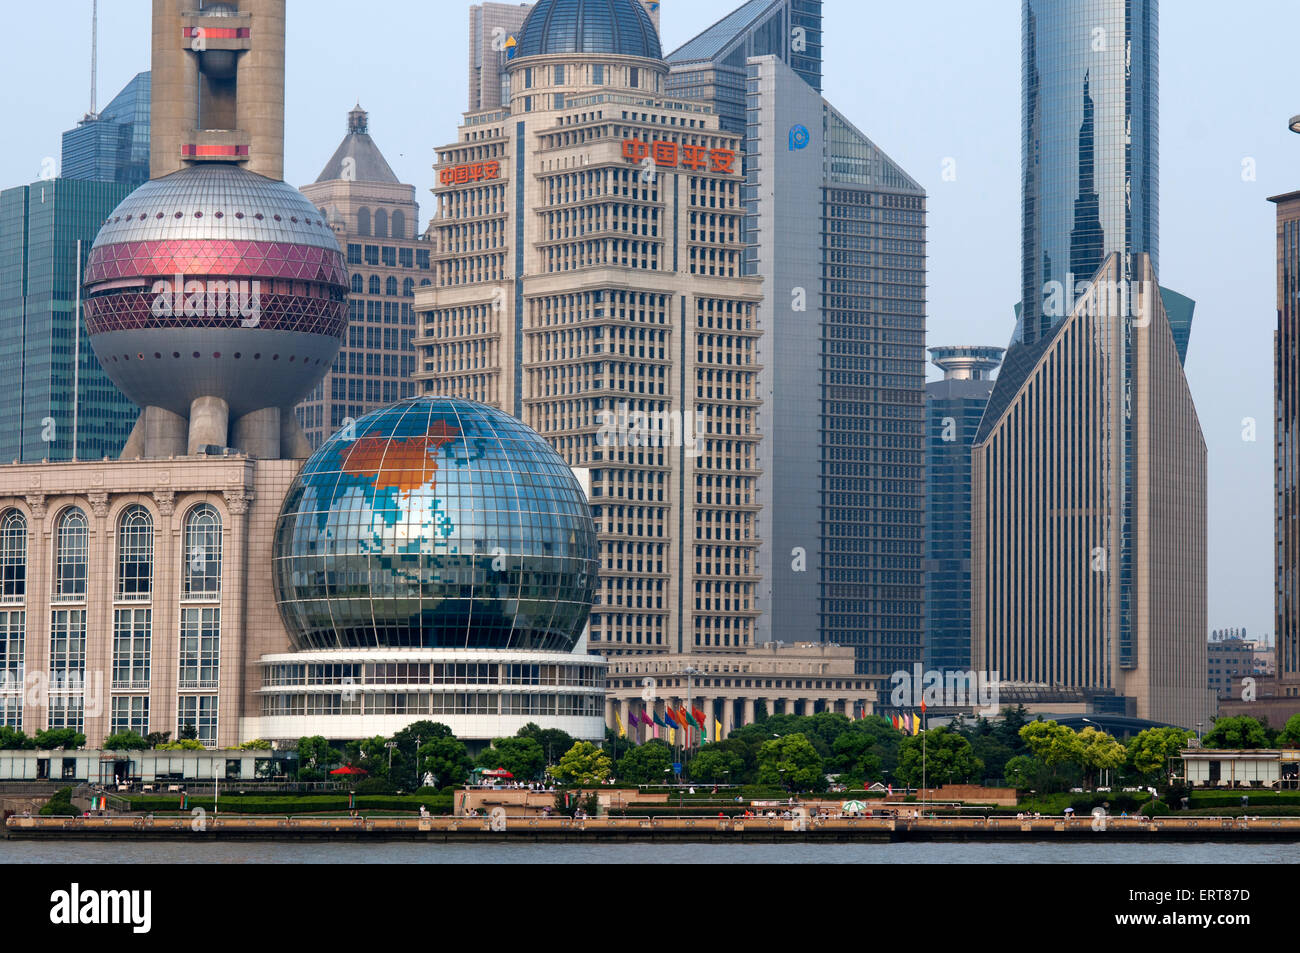 Pudong Skyline, Shanghai, China. Skyline of Pudong as seen from the Bund, with landmark Oriental Pearl tower and Jin Mao tower, Stock Photo